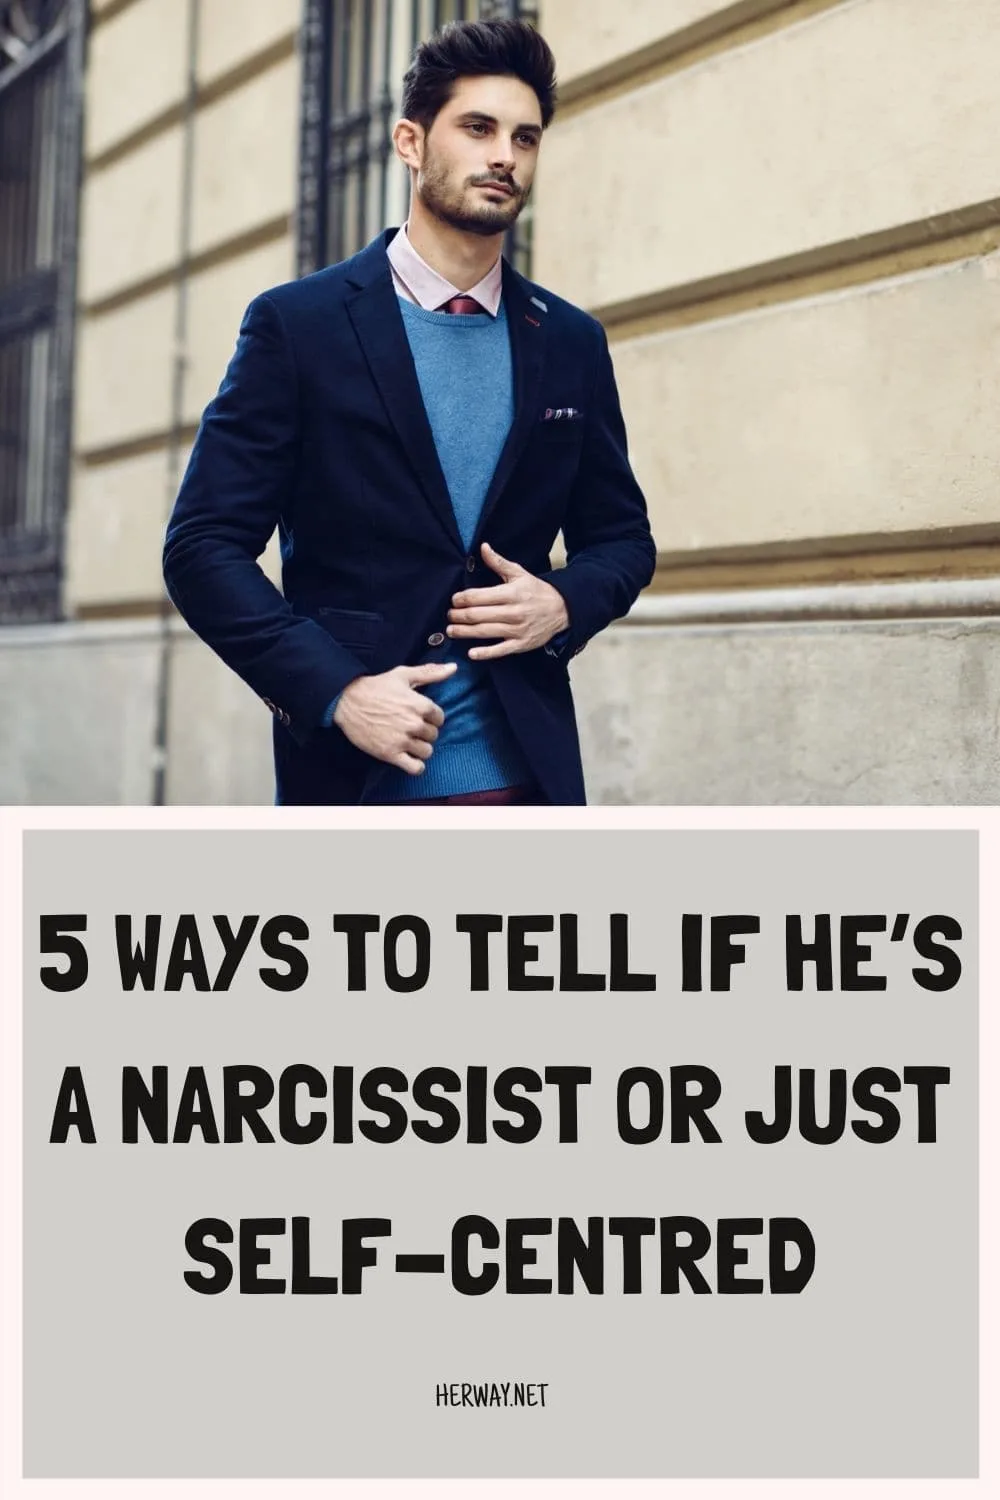 5 Ways To Tell If He’s A Narcissist Or Just Self-Centred